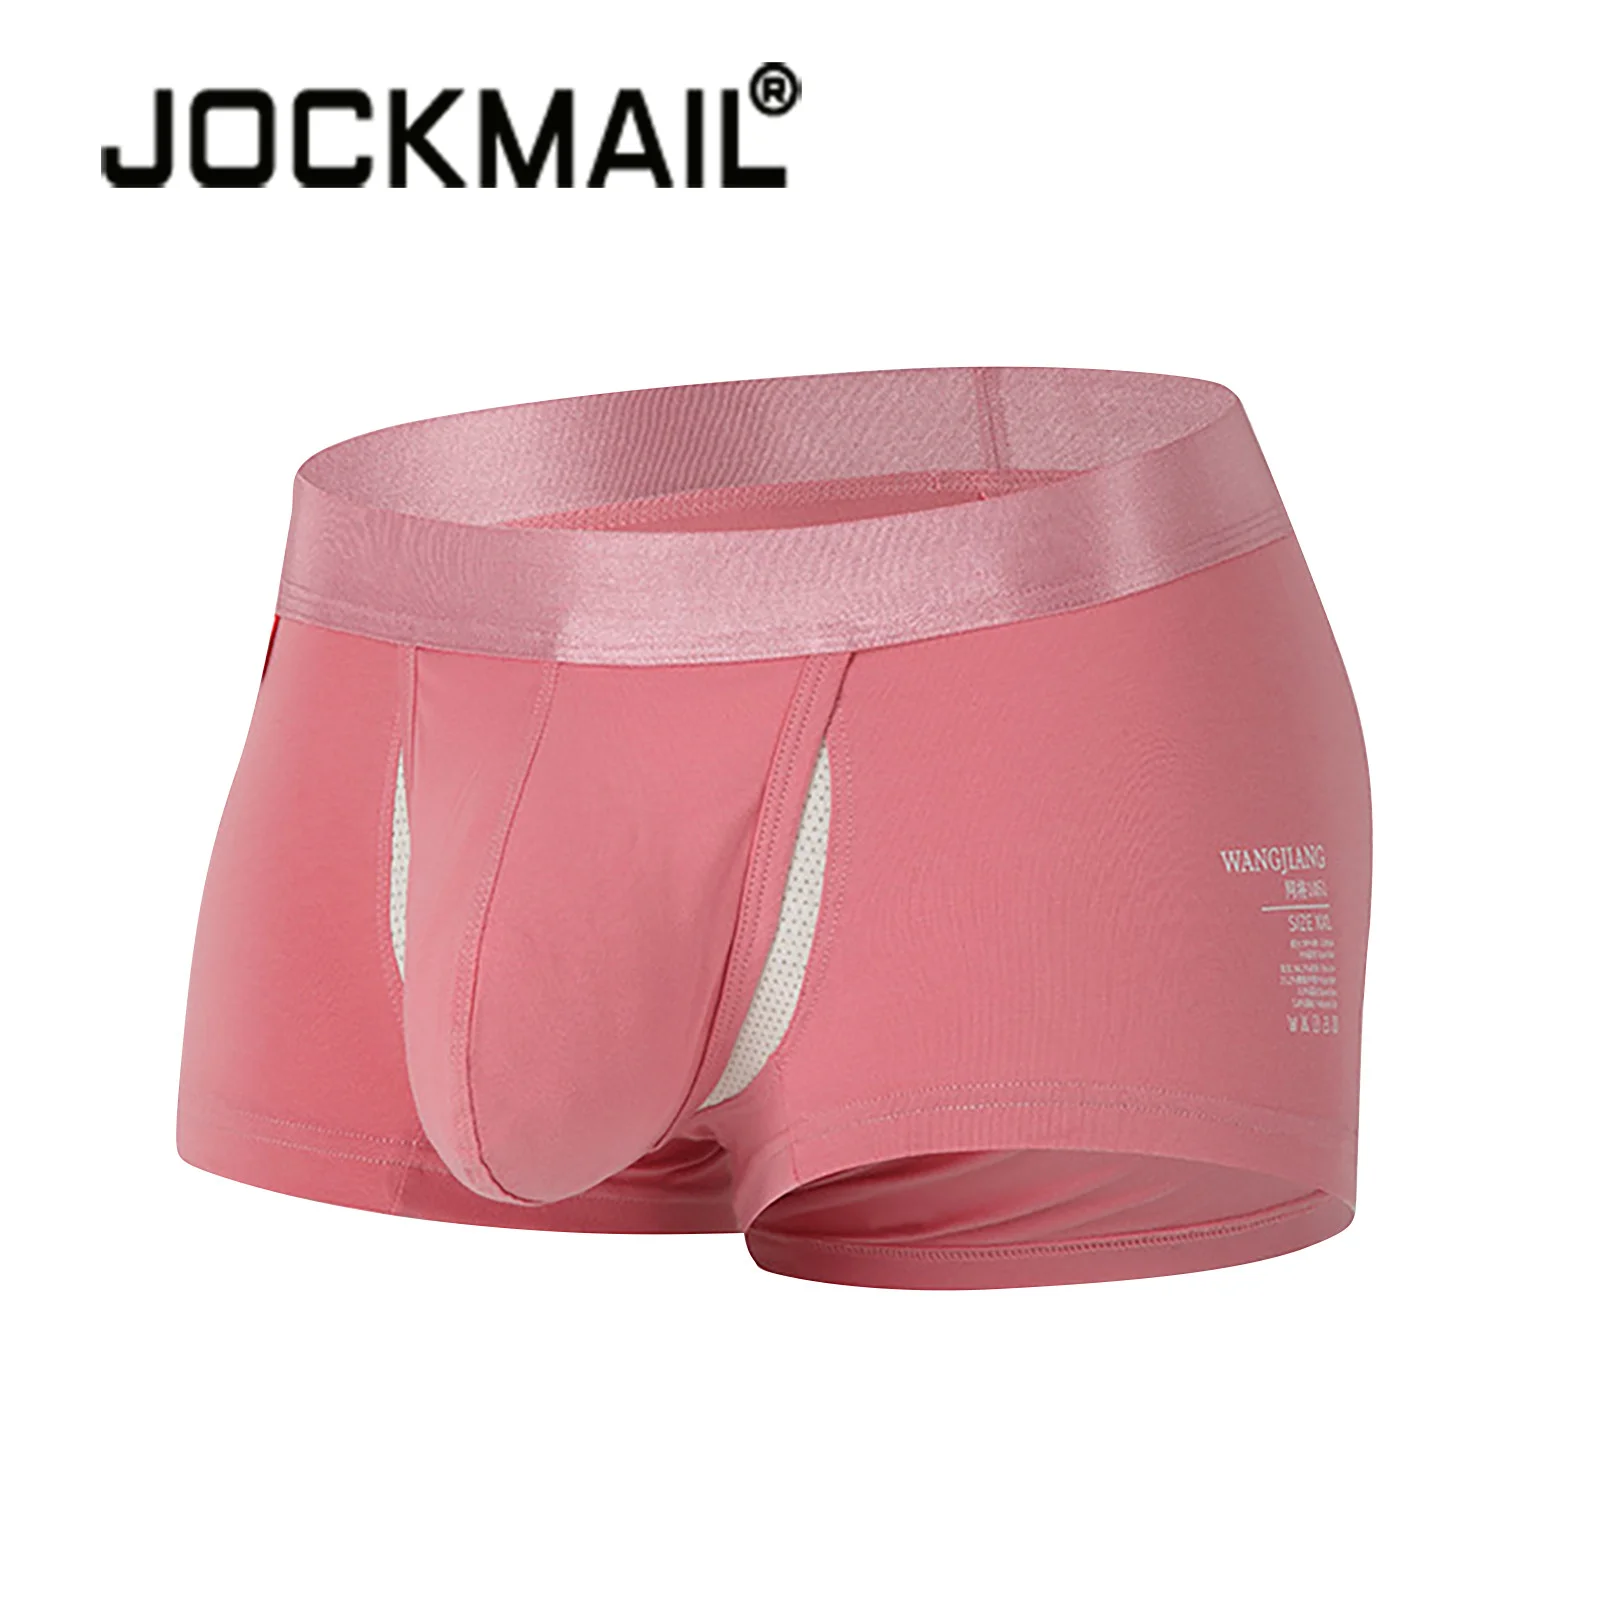 

JOCKMAIL Sexy Underwear Men Boxers Shorts homme Ice Silk Panties Man Breathable U Convex Pouch Underpants Cueca calzoncillo ropa